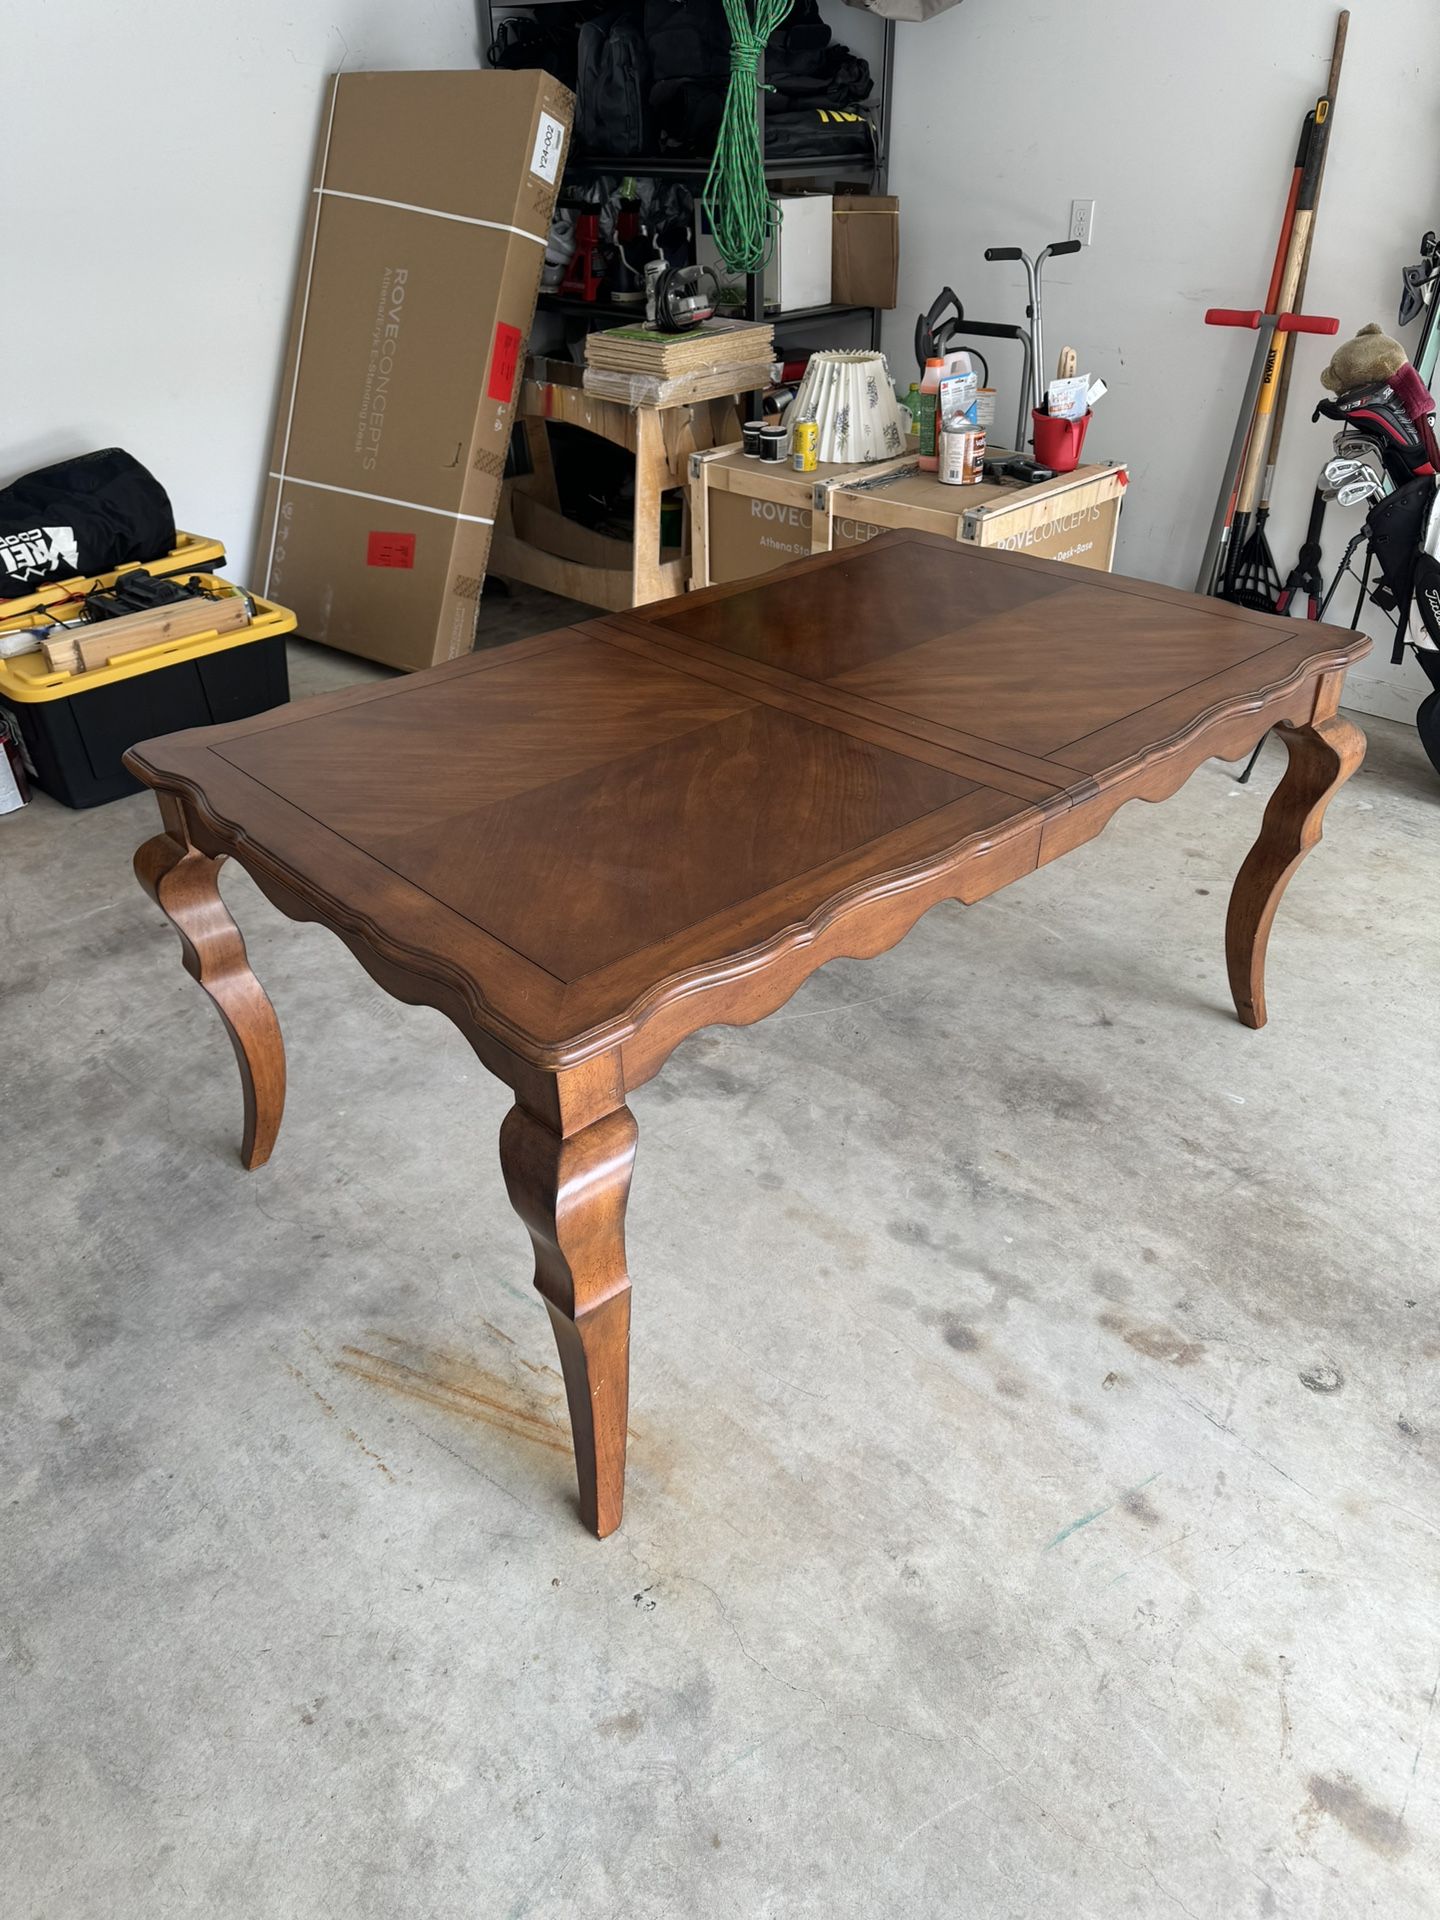 Ornate Wooden Table